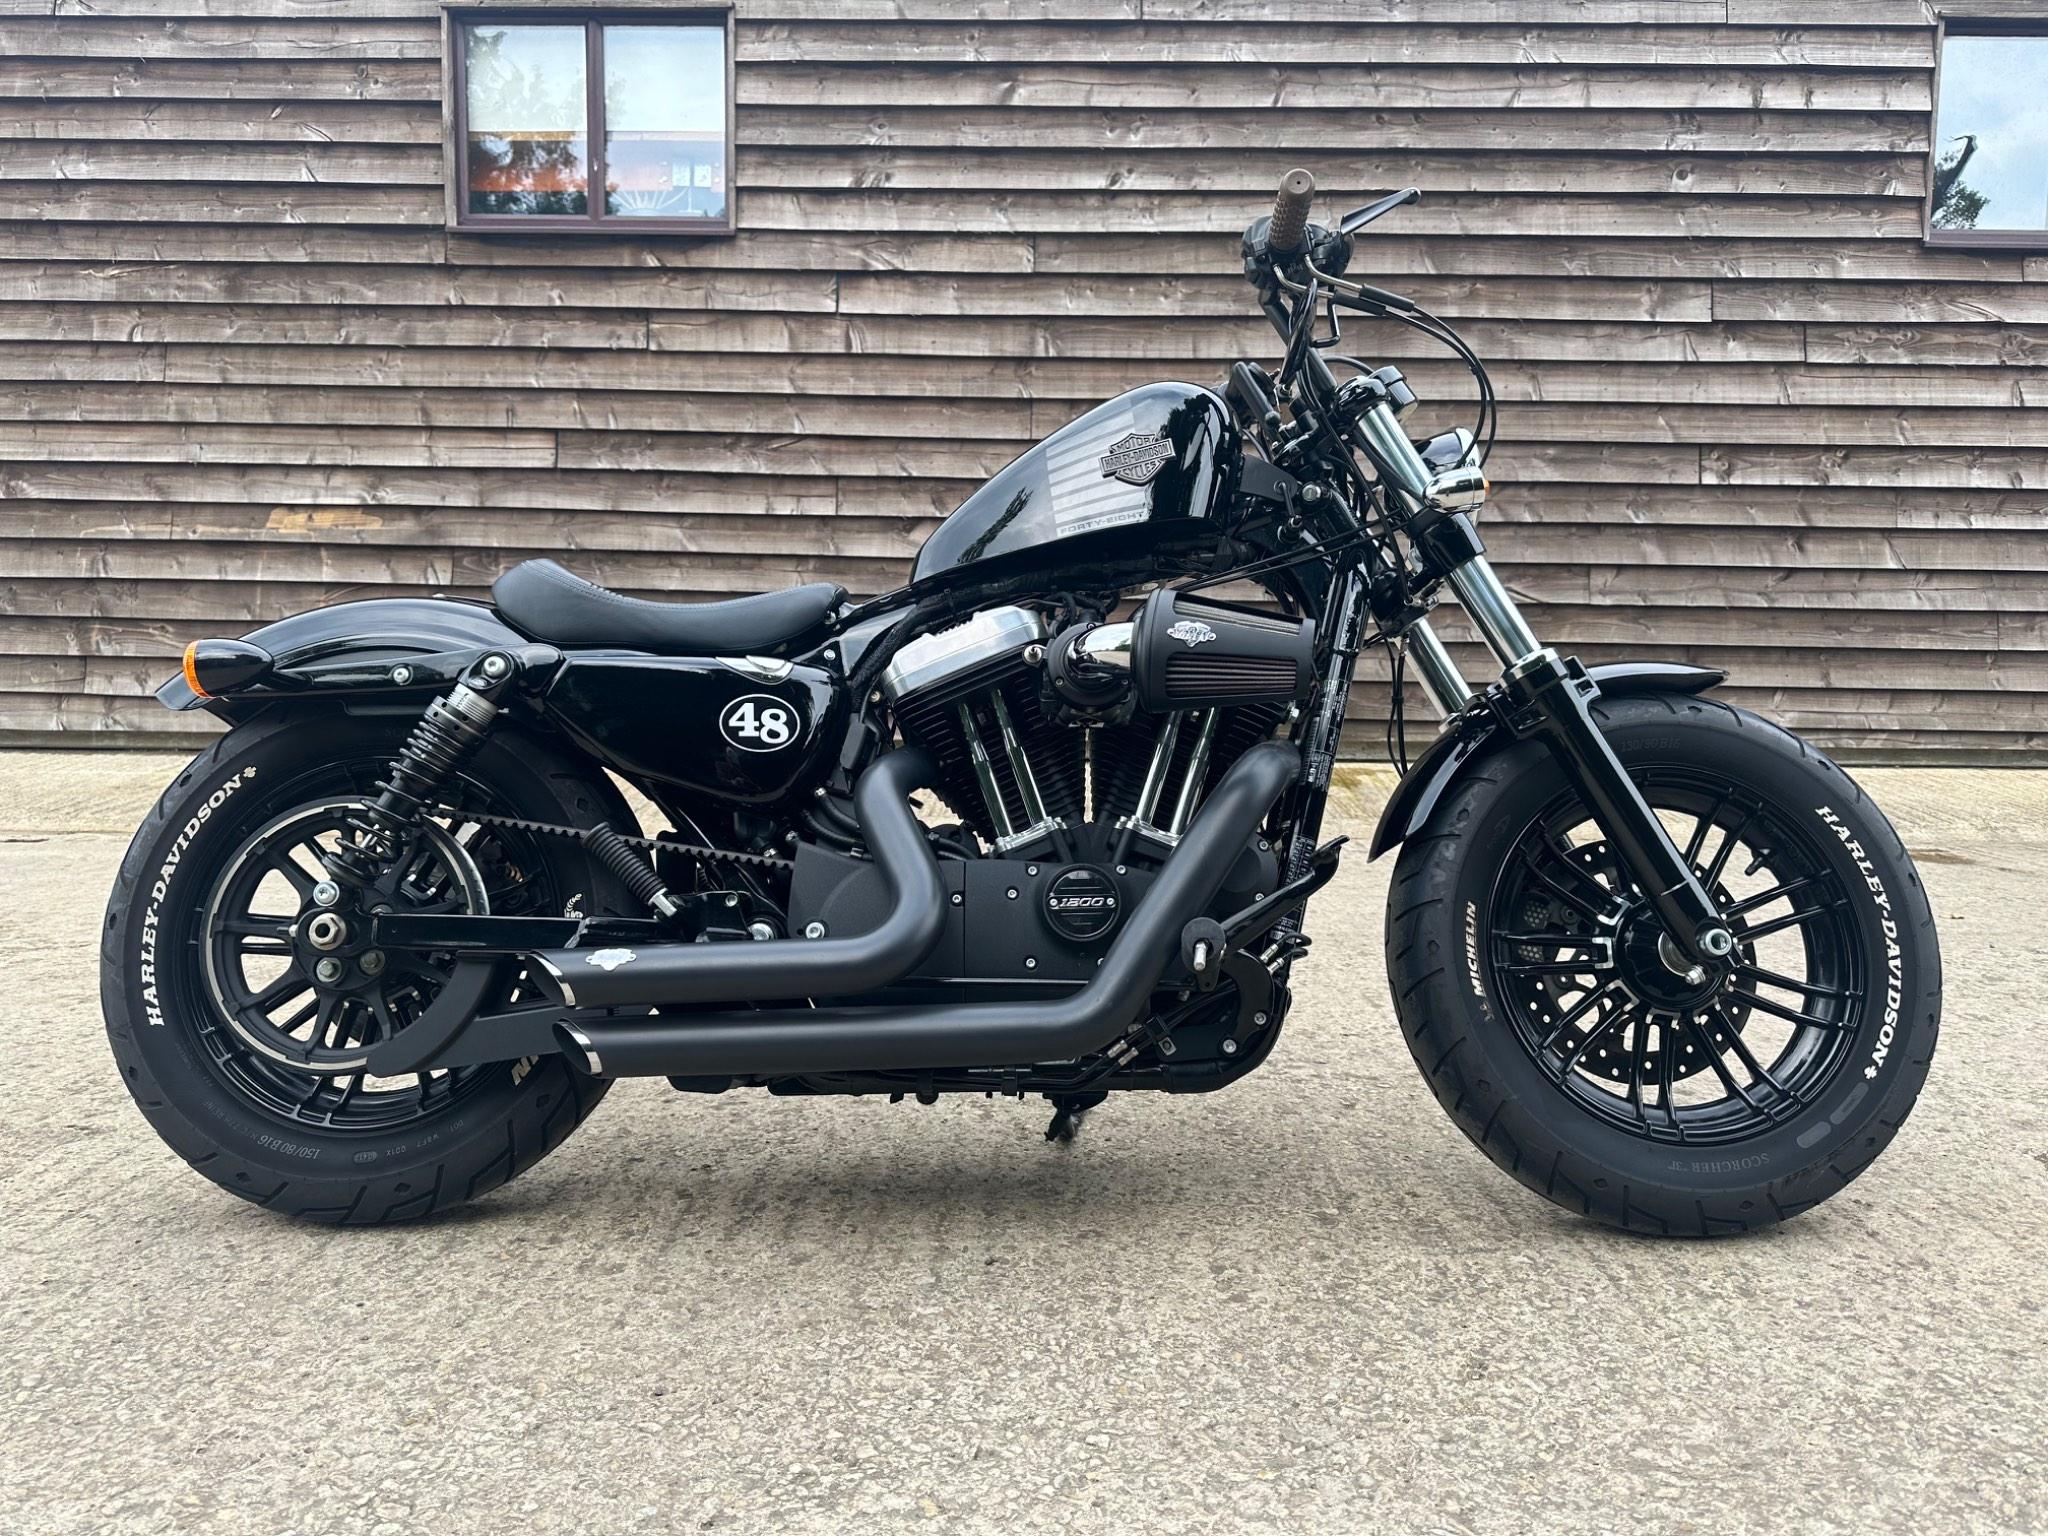 2017 Harley-Davidson Sportster 1200 XL X Sportster Forty Eight From £178.72 per month 